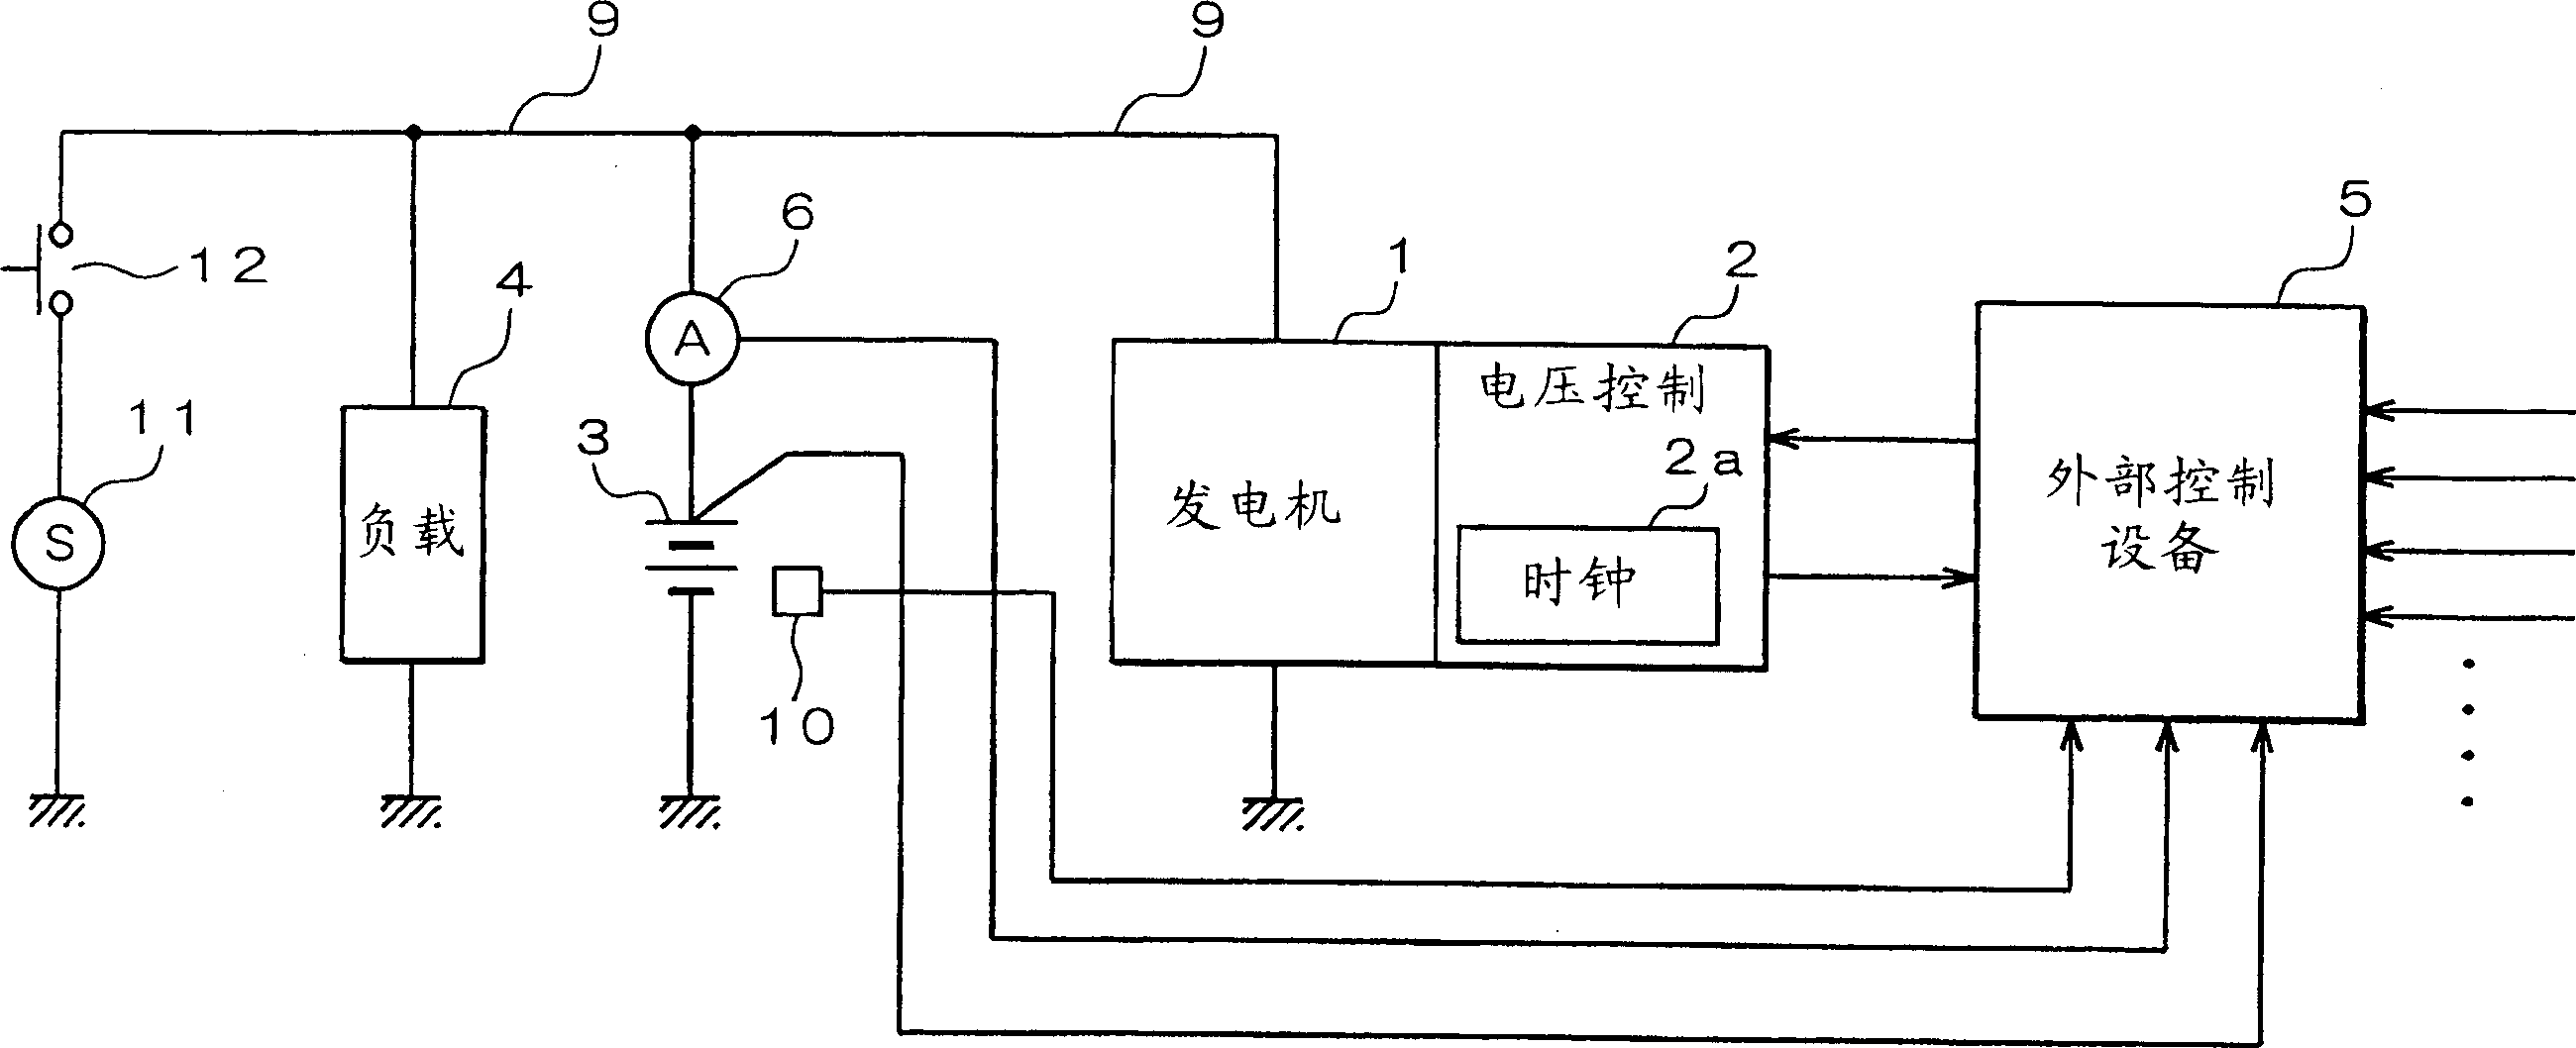 Electric power generating system for a vehicle